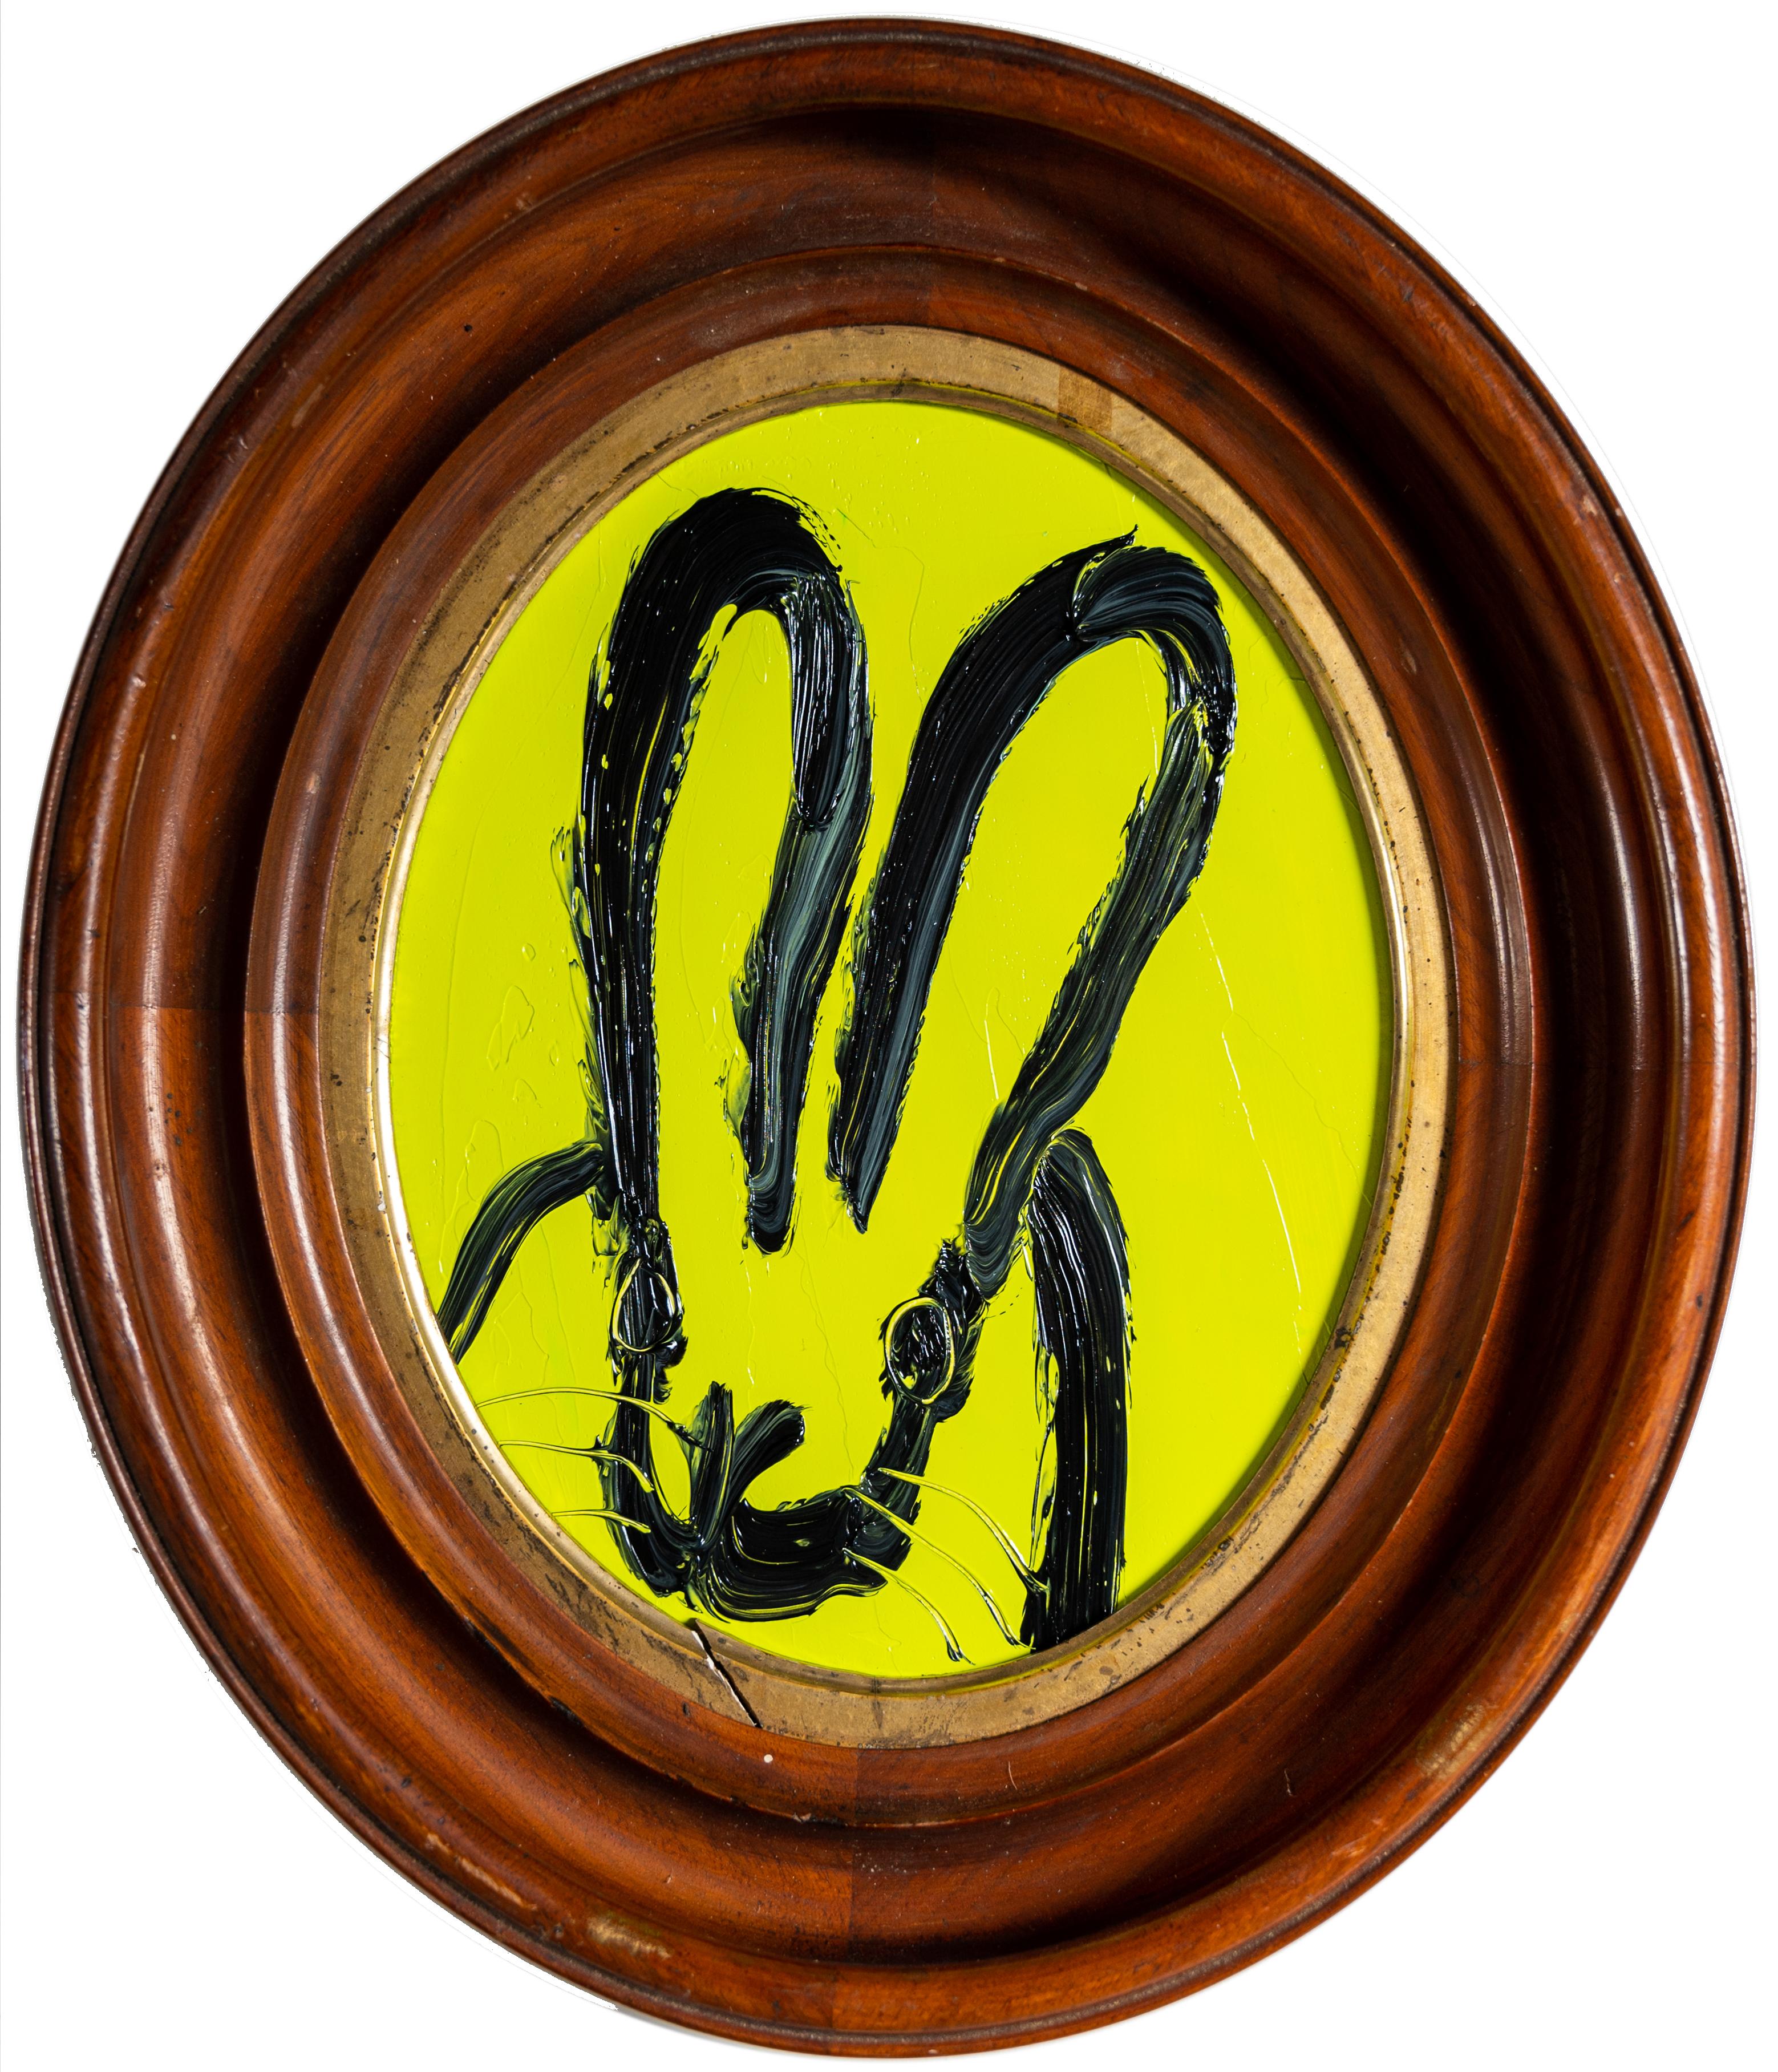 Hunt Slonem "Thalo" Green Bunny
A gestured bunny rabbit in black on a yellow lime green background. Framed in a vintage oval wooden frame.

Unframed: 10 x 8 inches
Framed: 14.5 x 12.5 inches
*Painting is framed - Please note Hunt Slonem paintings